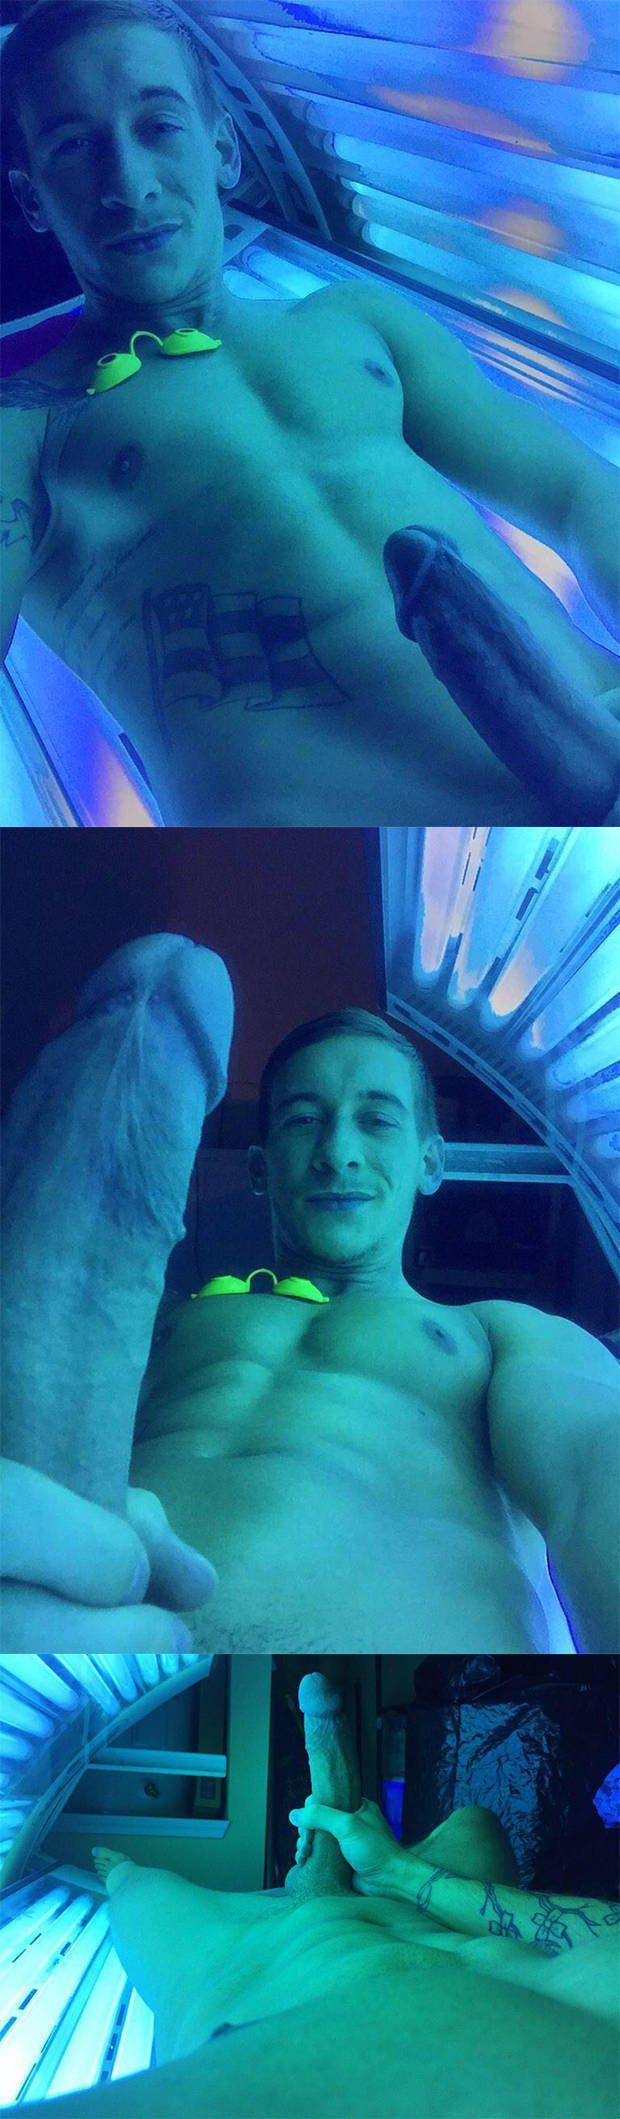 QB reccomend Tanning bed naked for guys